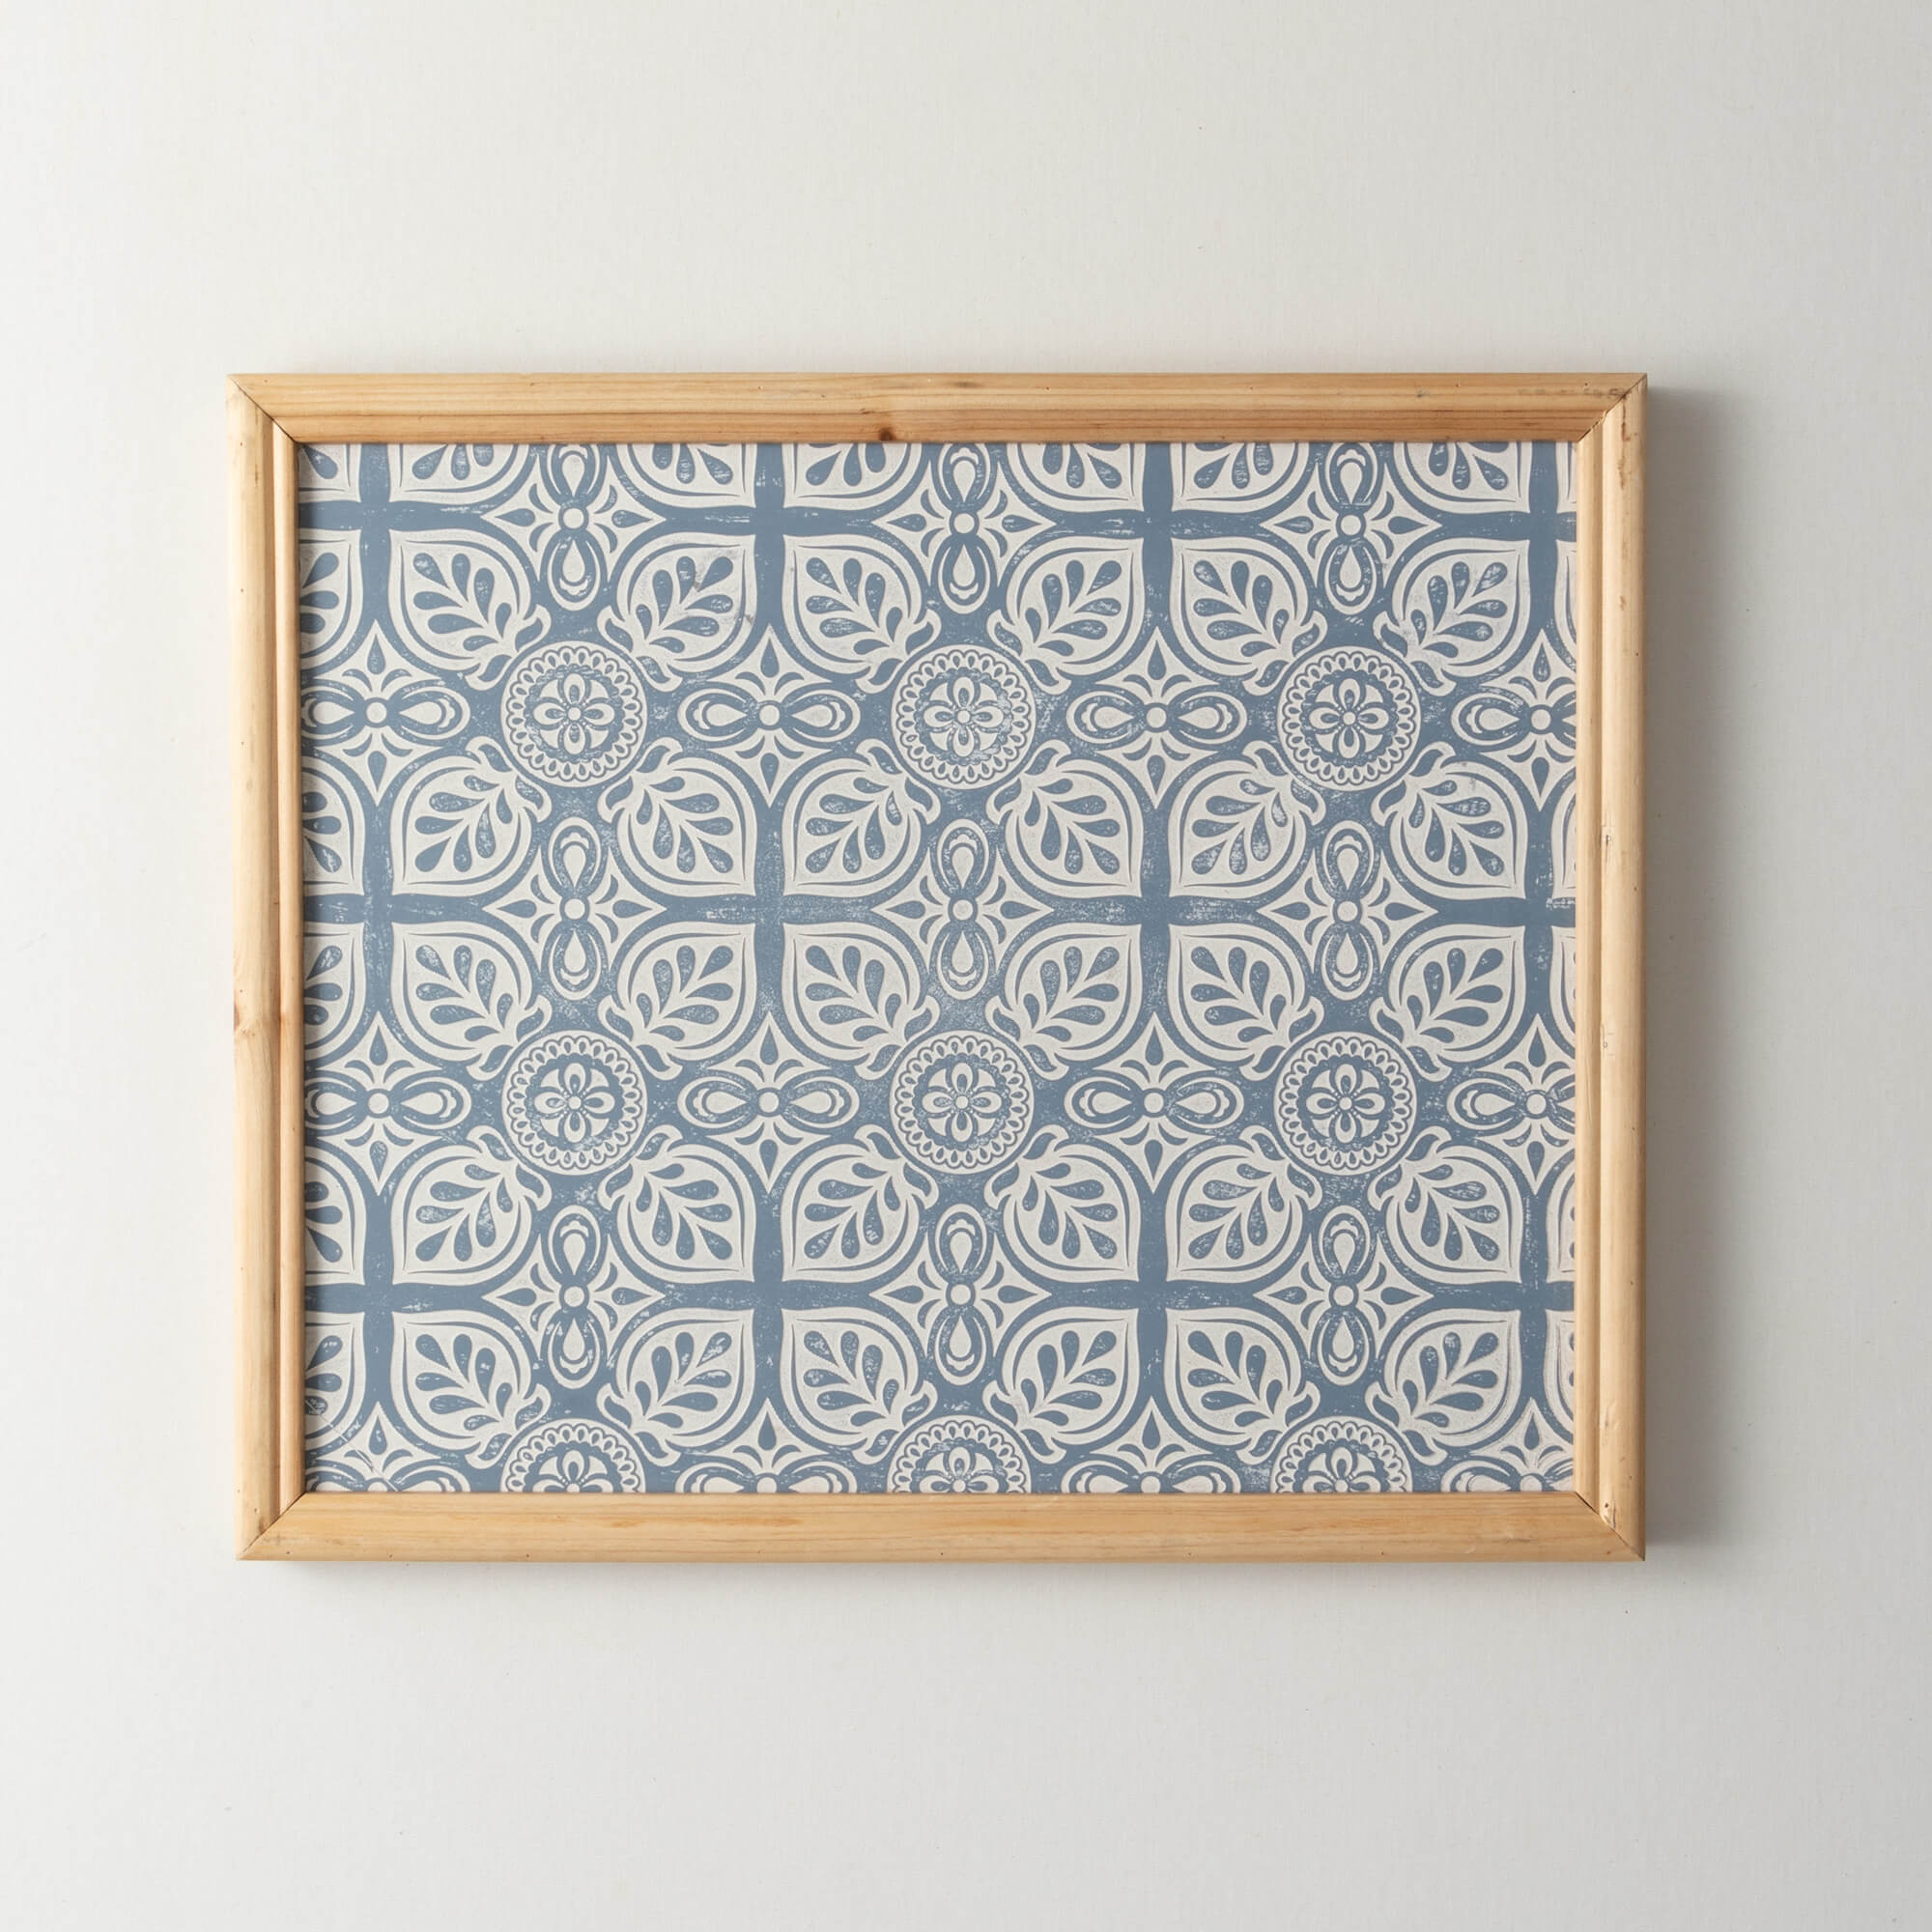 PATTERNED WALL DECOR